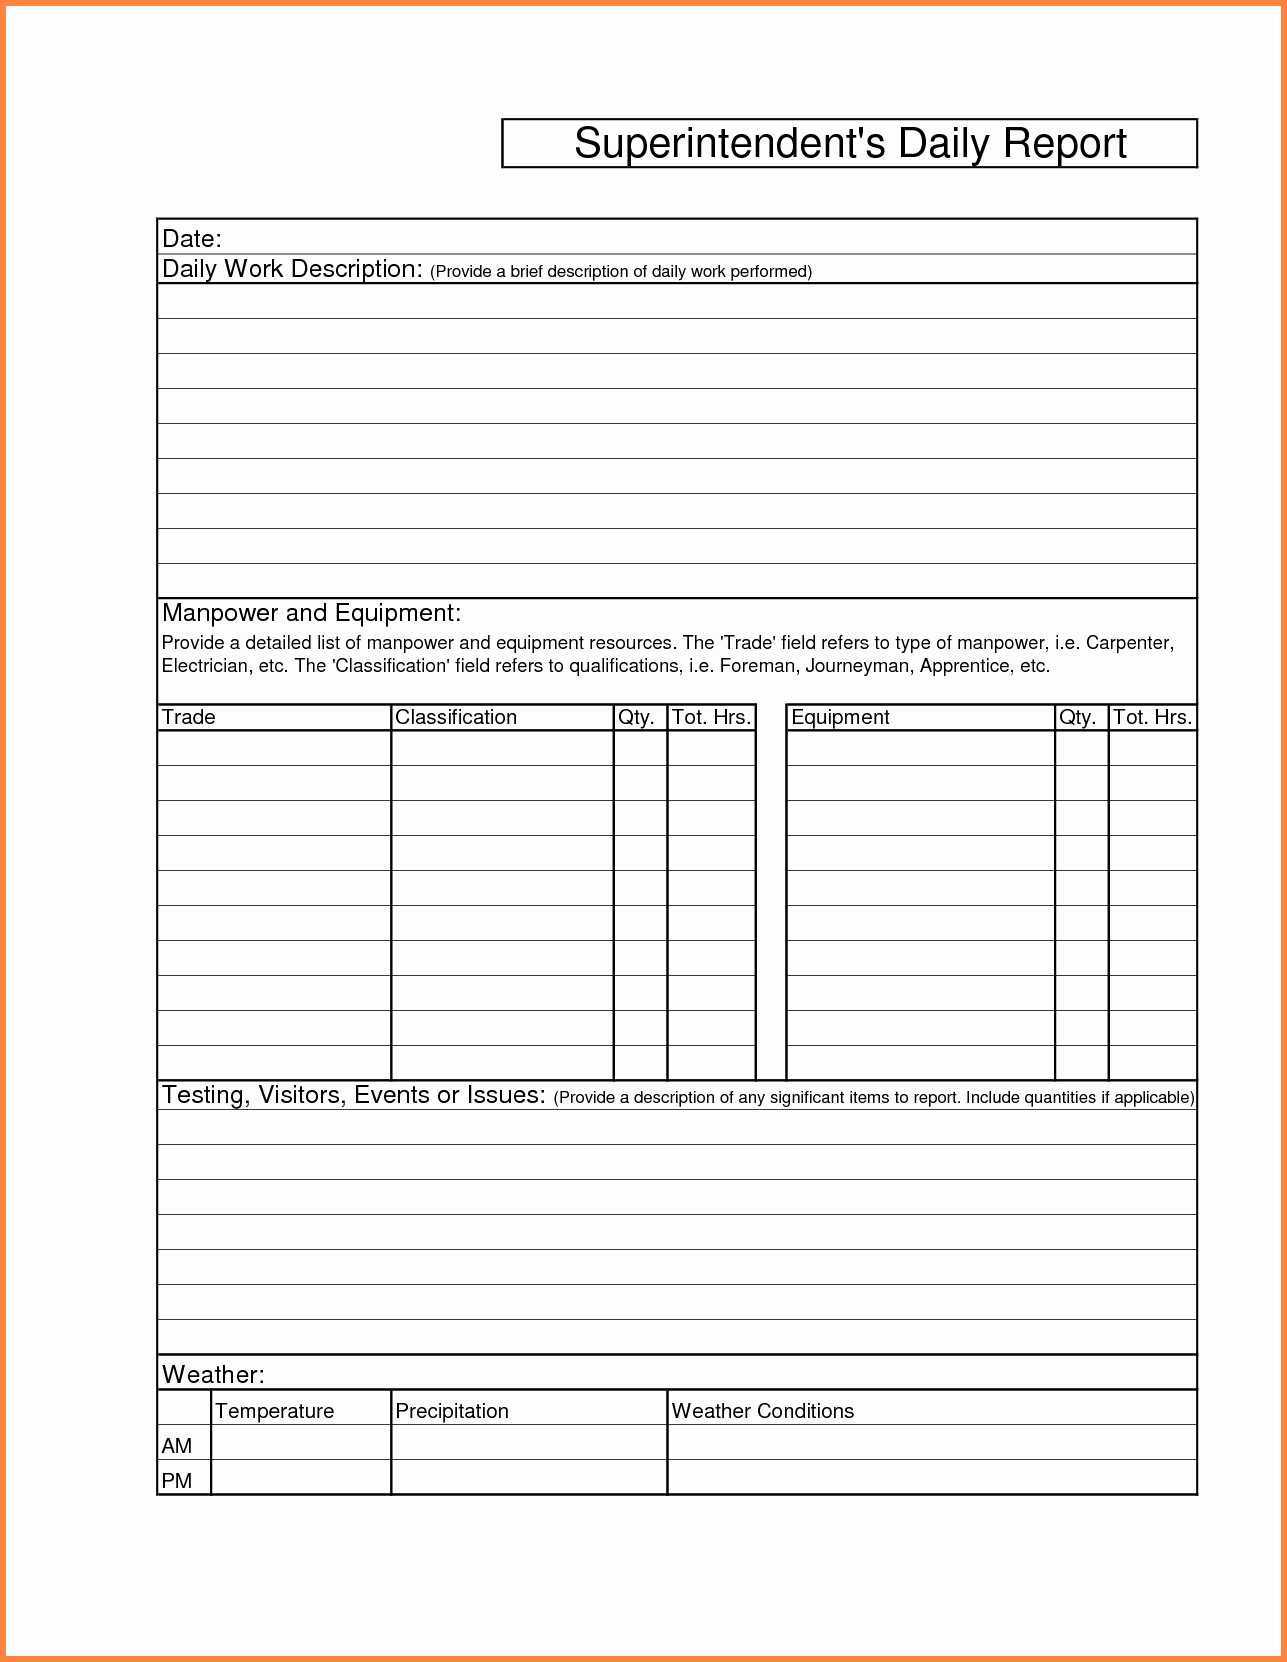 Escrow Analysis Spreadsheet And Sales Port Sample Free Daily Regarding Employee Daily Report Template